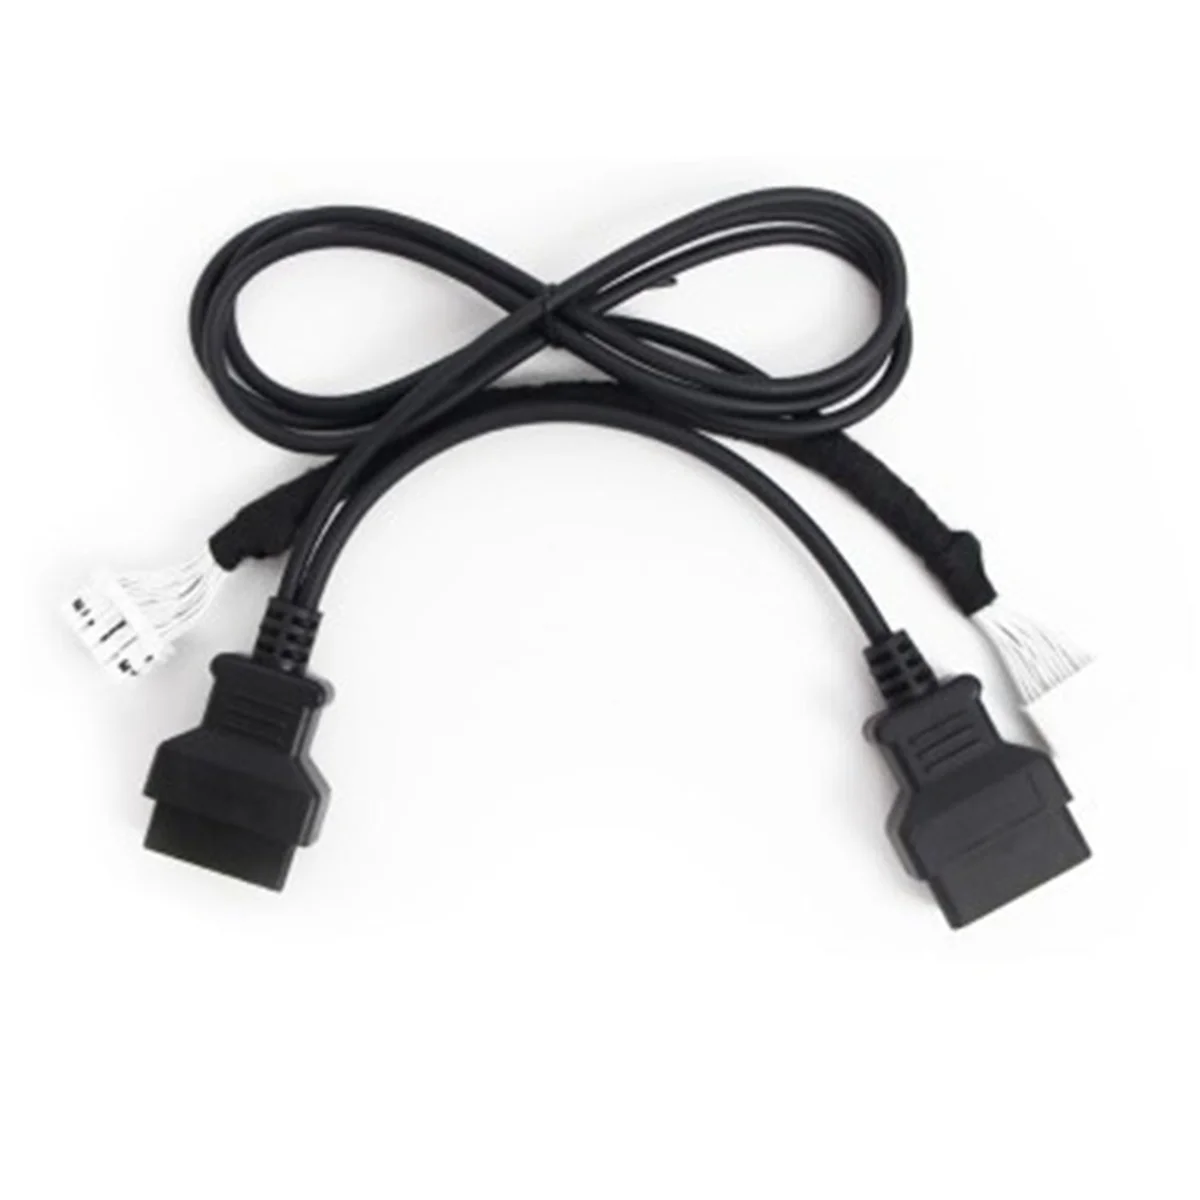 

For -30 Cable Proximity OBDSTAR Key Programming All Key Lost Support 4A and 8A- No Need to Pierce the Harness